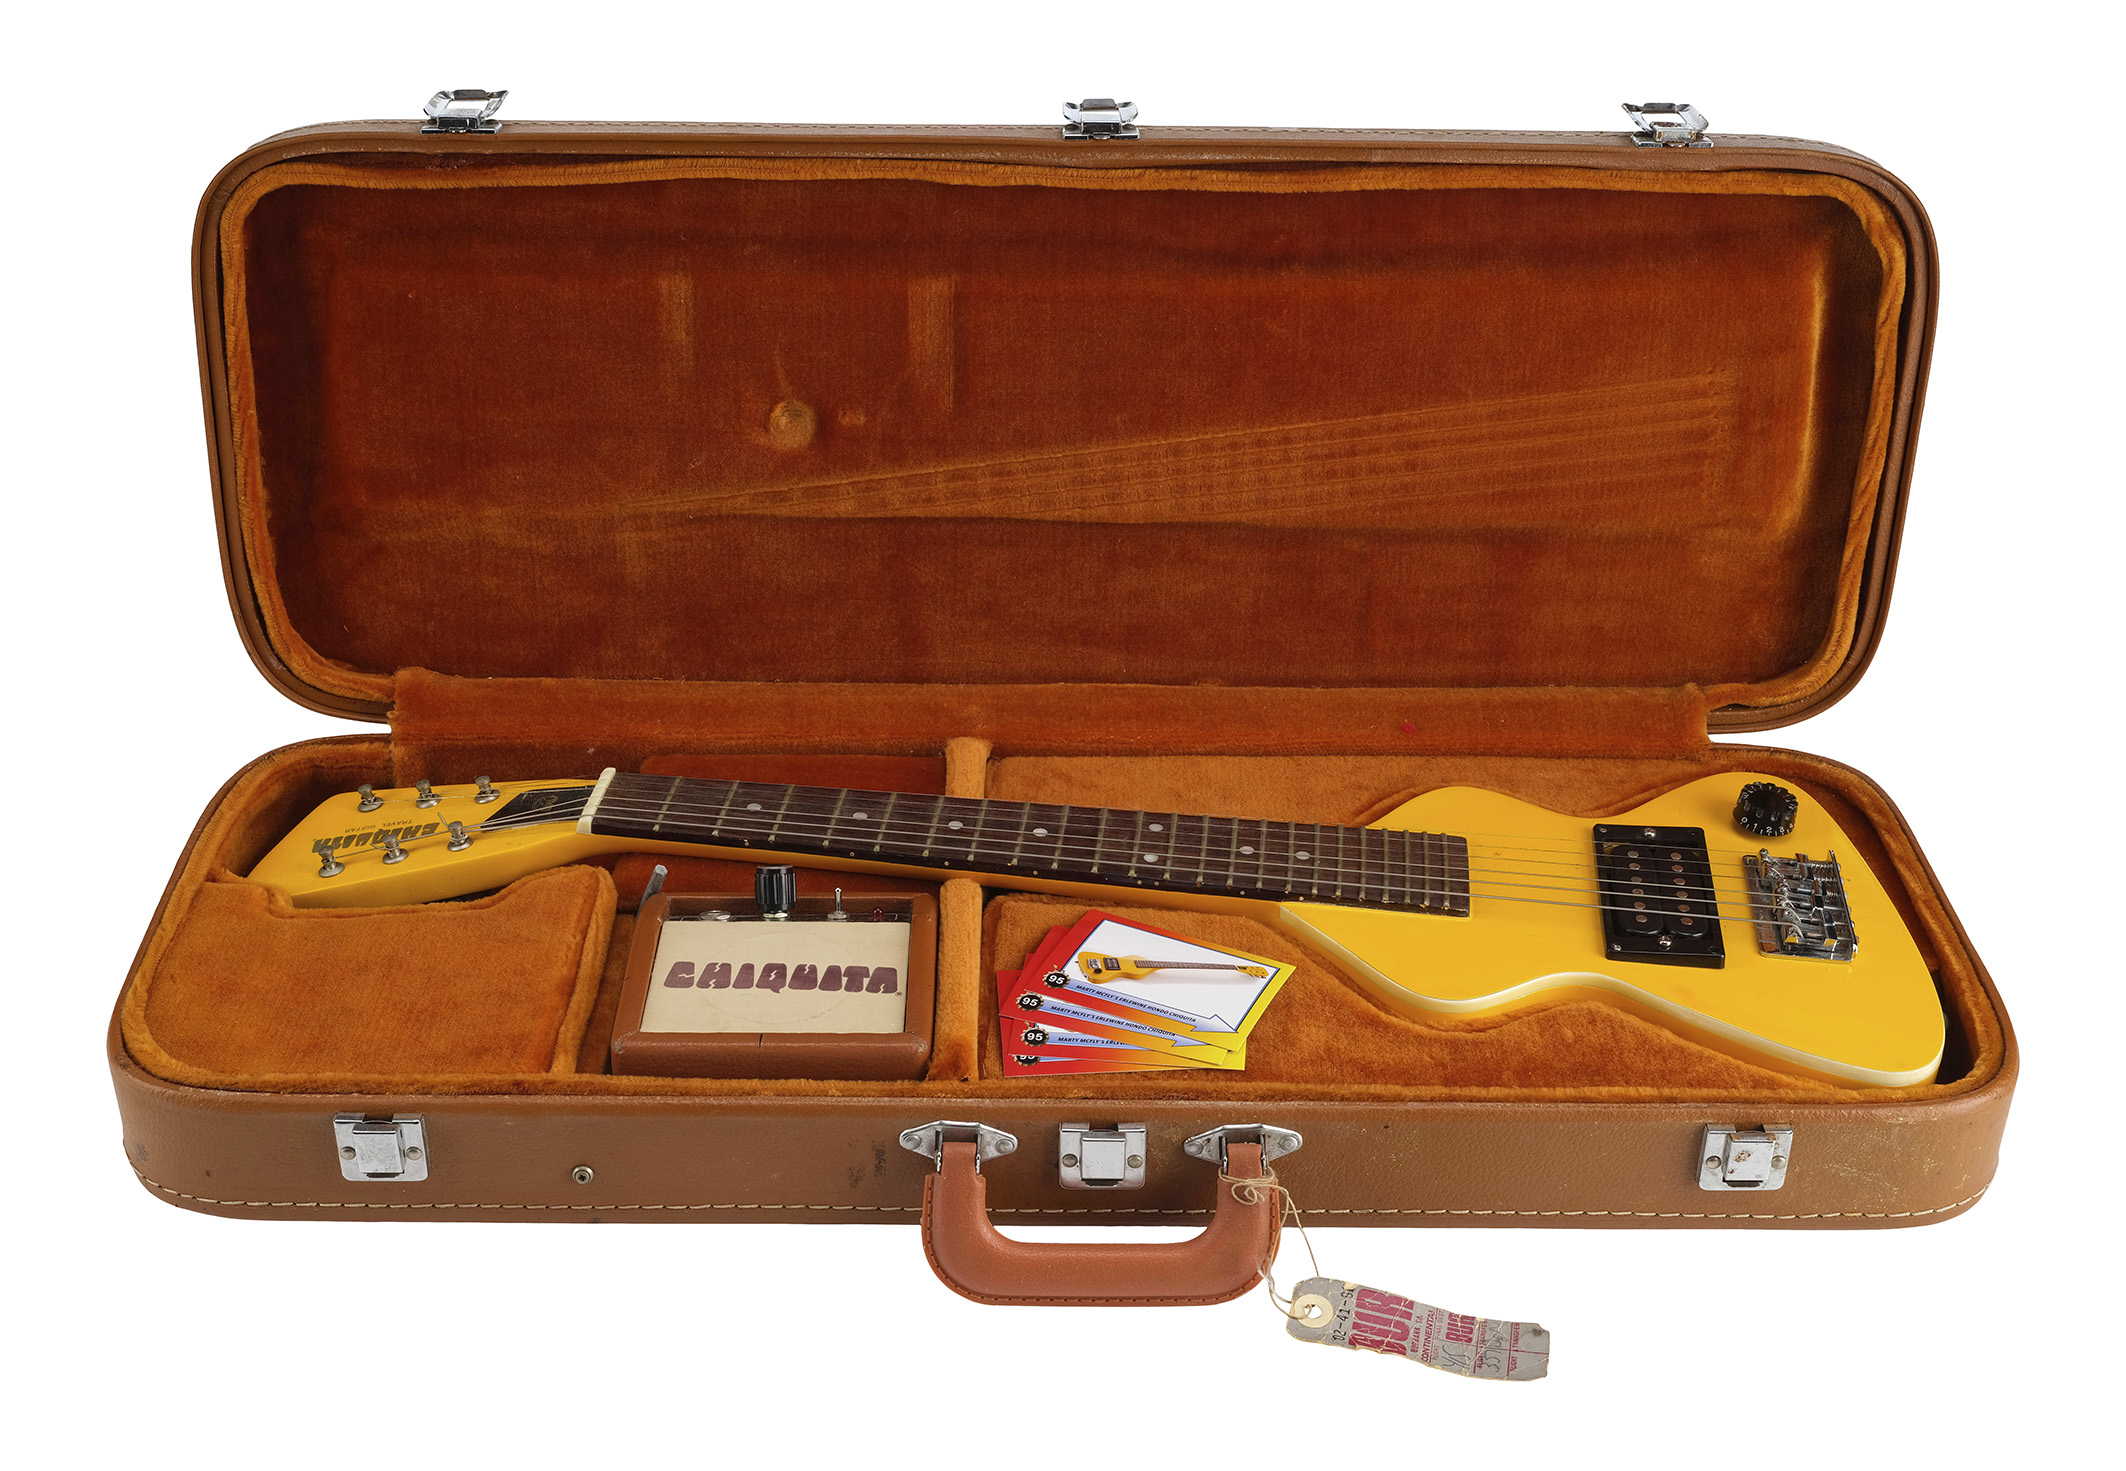 BACK TO THE FUTURE (1985) Marty McFly's (Michael J. Fox) Guitar